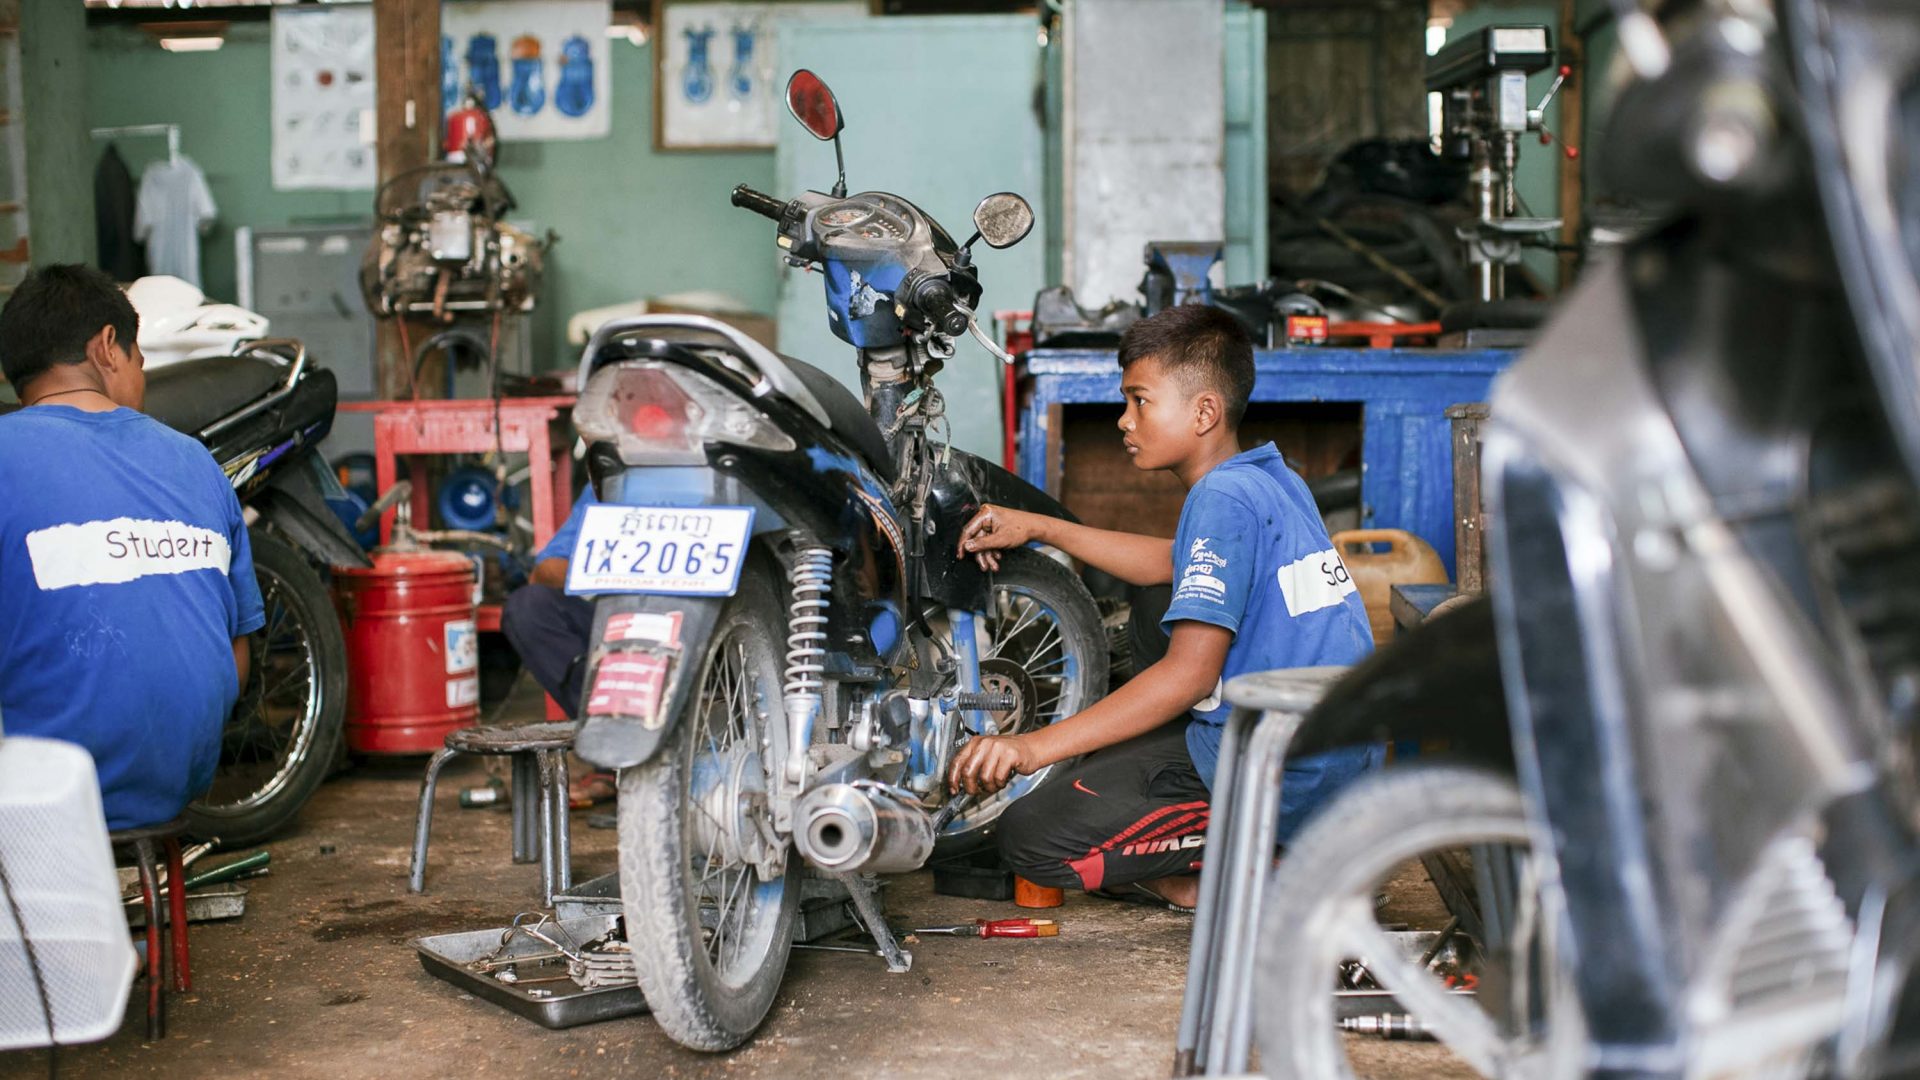 Friends-International is helping to improve the lives of street-living and working children through vocational training, including motorcycle mechanic training.